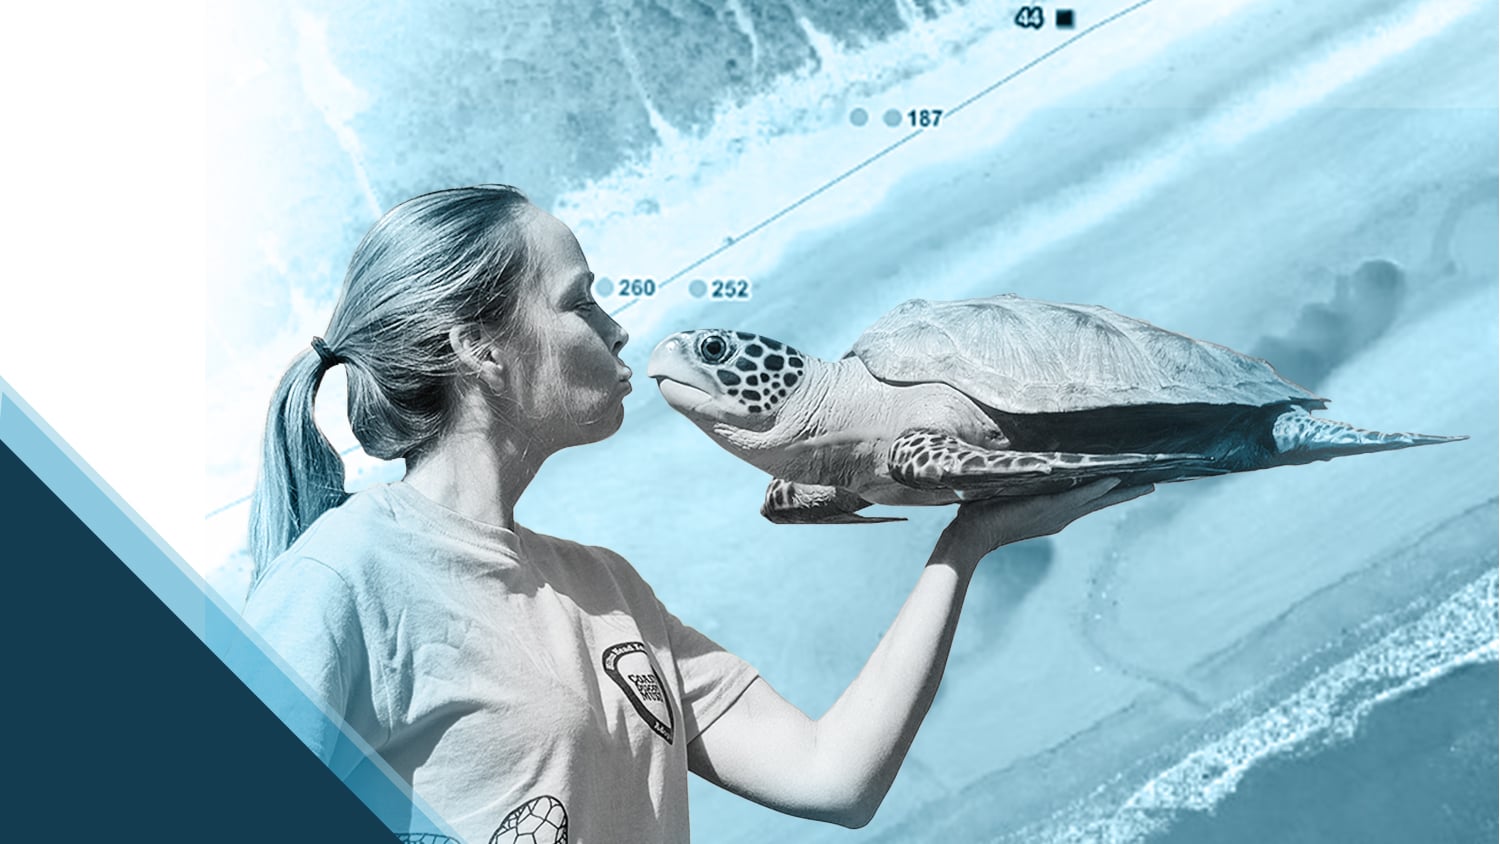 Amber Kuehn Customer Spotlight Hero Image Kissing Endangered Sea Turtle with GNSS GIS GPS map of nests in background